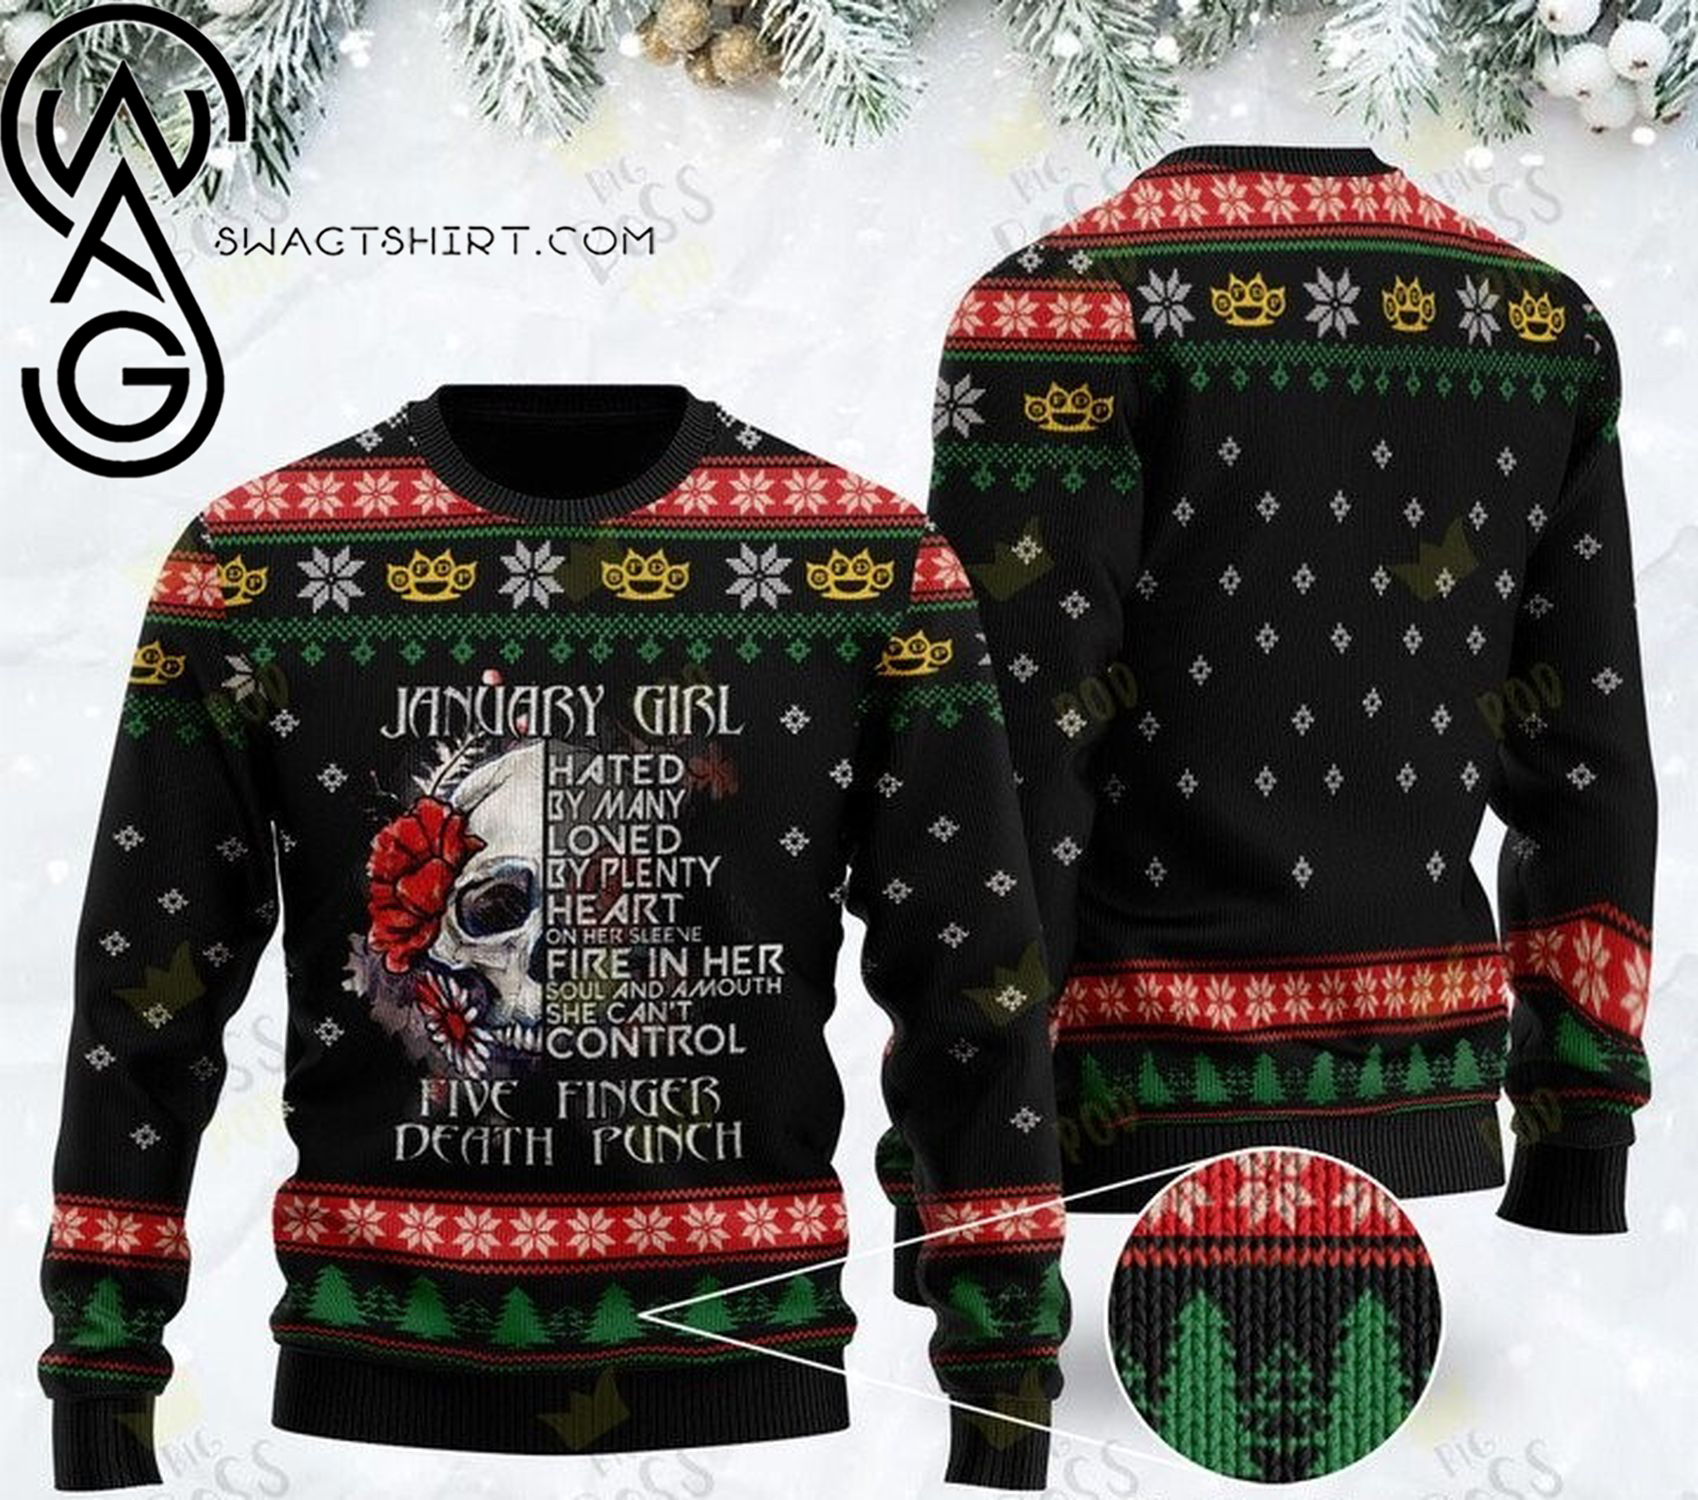 January girl five finger death punch ugly christmas sweater - Copy